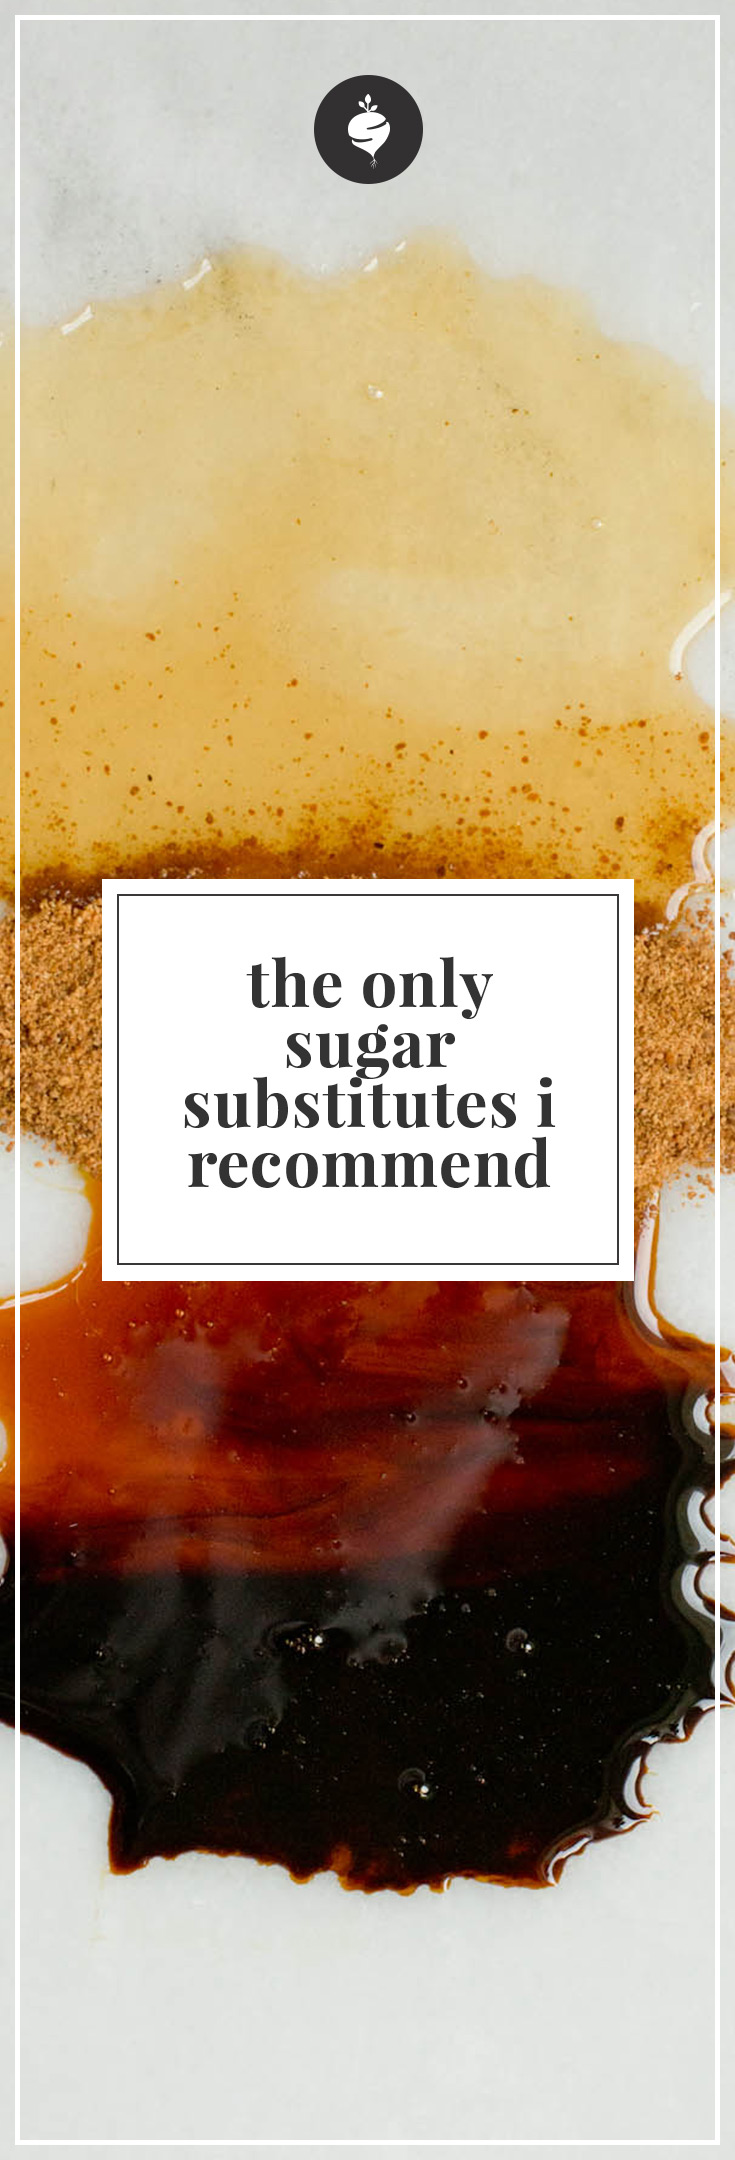 Download this FREE Healthy Sugar Guide to know what to substitute and how much to substitute in your recipes.